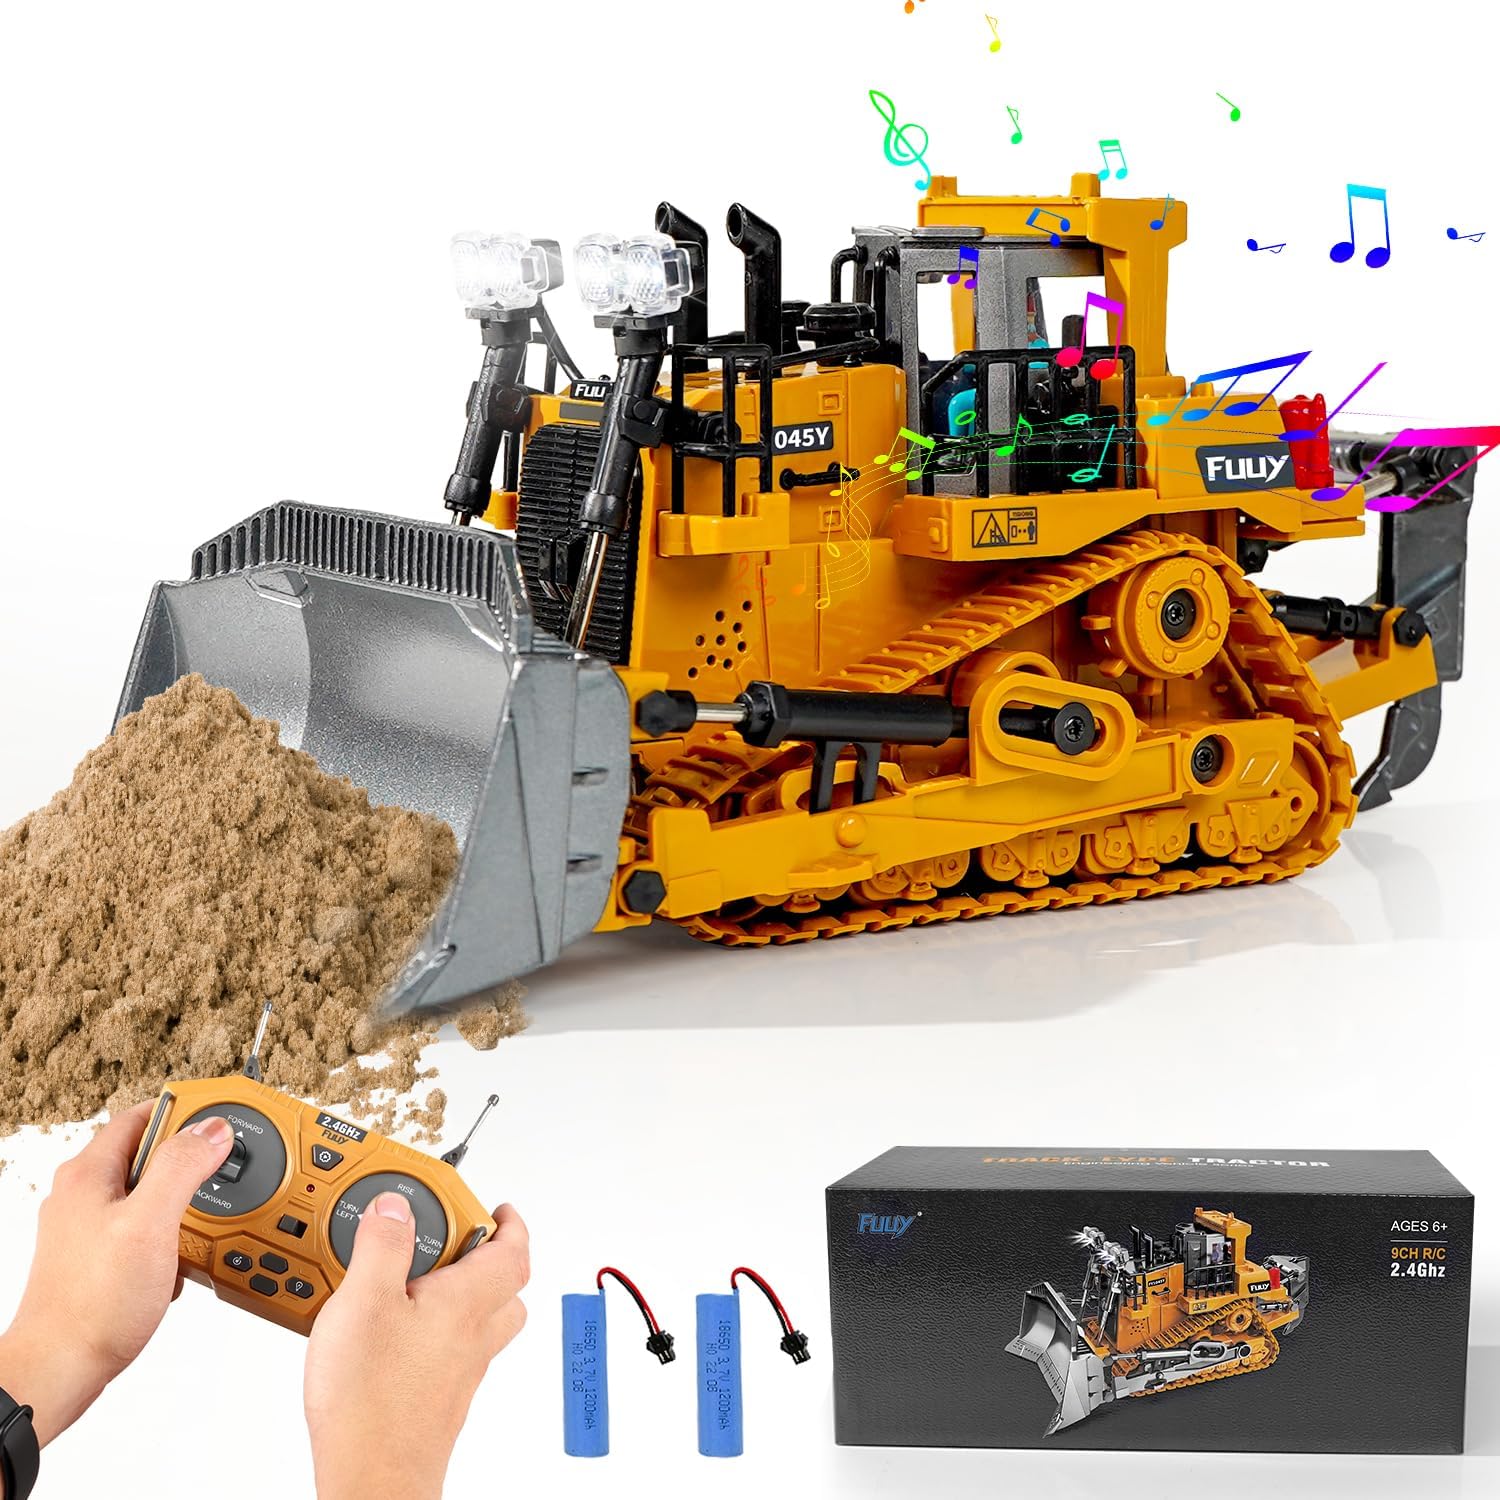 FUUY Construction Toys for 3 Year Old Boys: A Realistic Remote Control Bulldozer Review